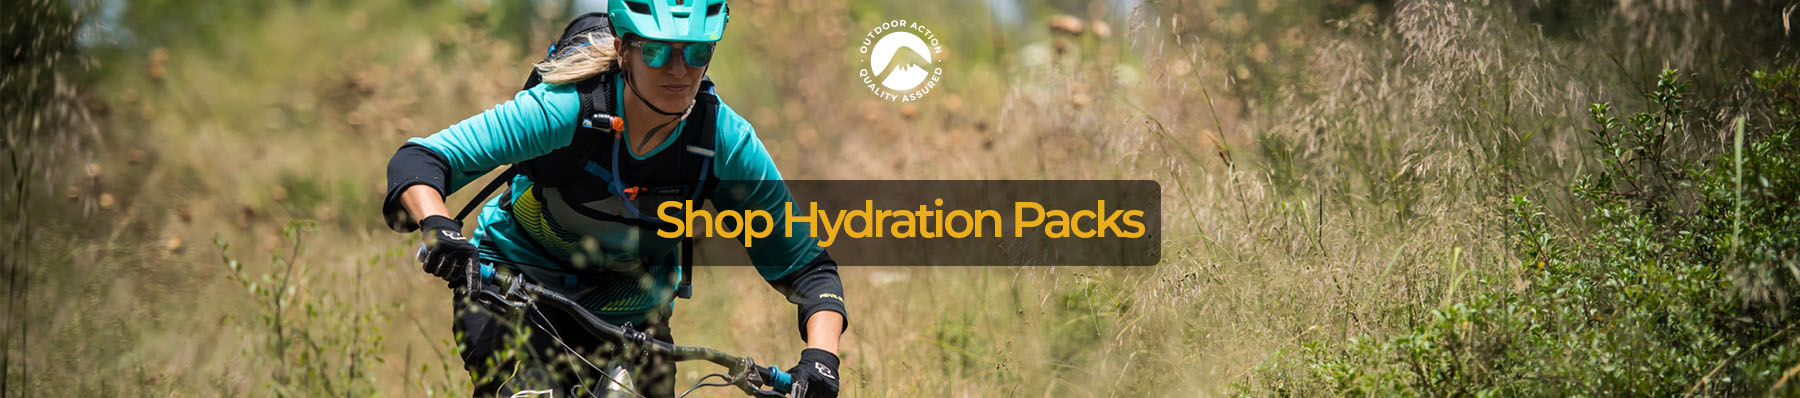 Shop Hydration Packs online at Outdoor Action